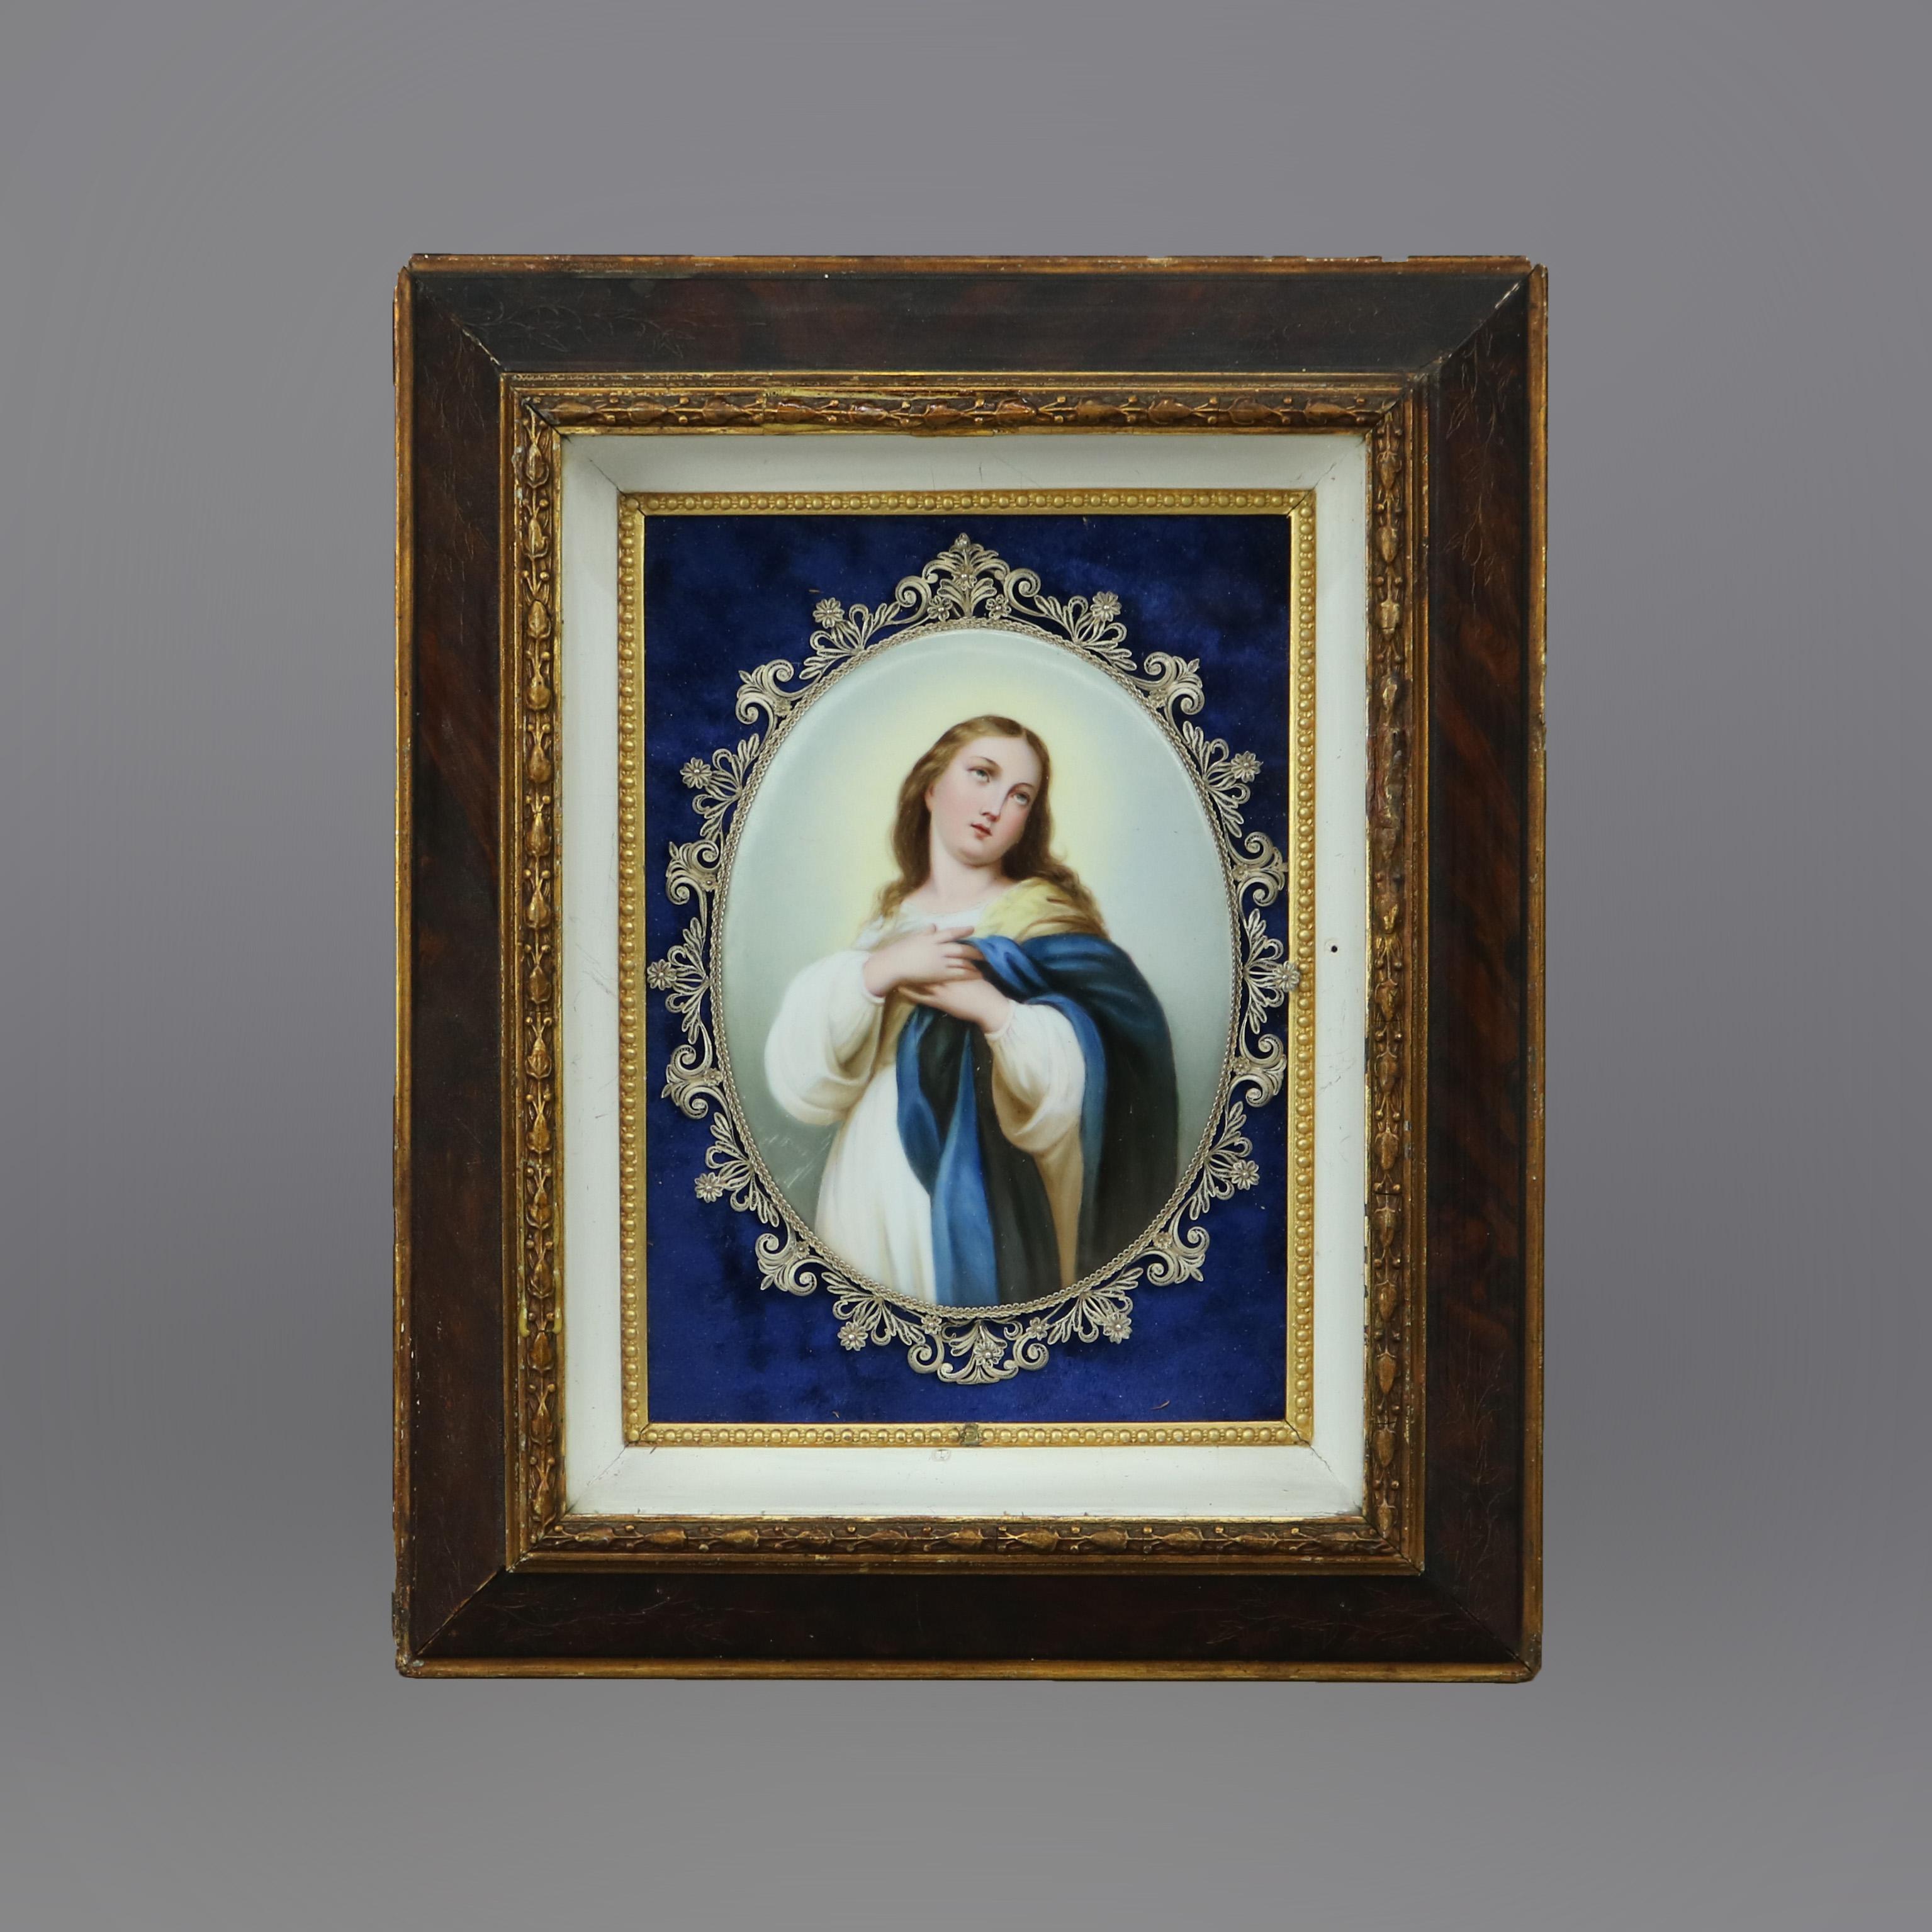 An antique German painted porcelain plaque in the manner of KPM offers portrait of Classical young woman, seated in frame with reticulated sterling silver frame, c1890

Measures - 15.25''H x 12.5''W x 2.75''D.